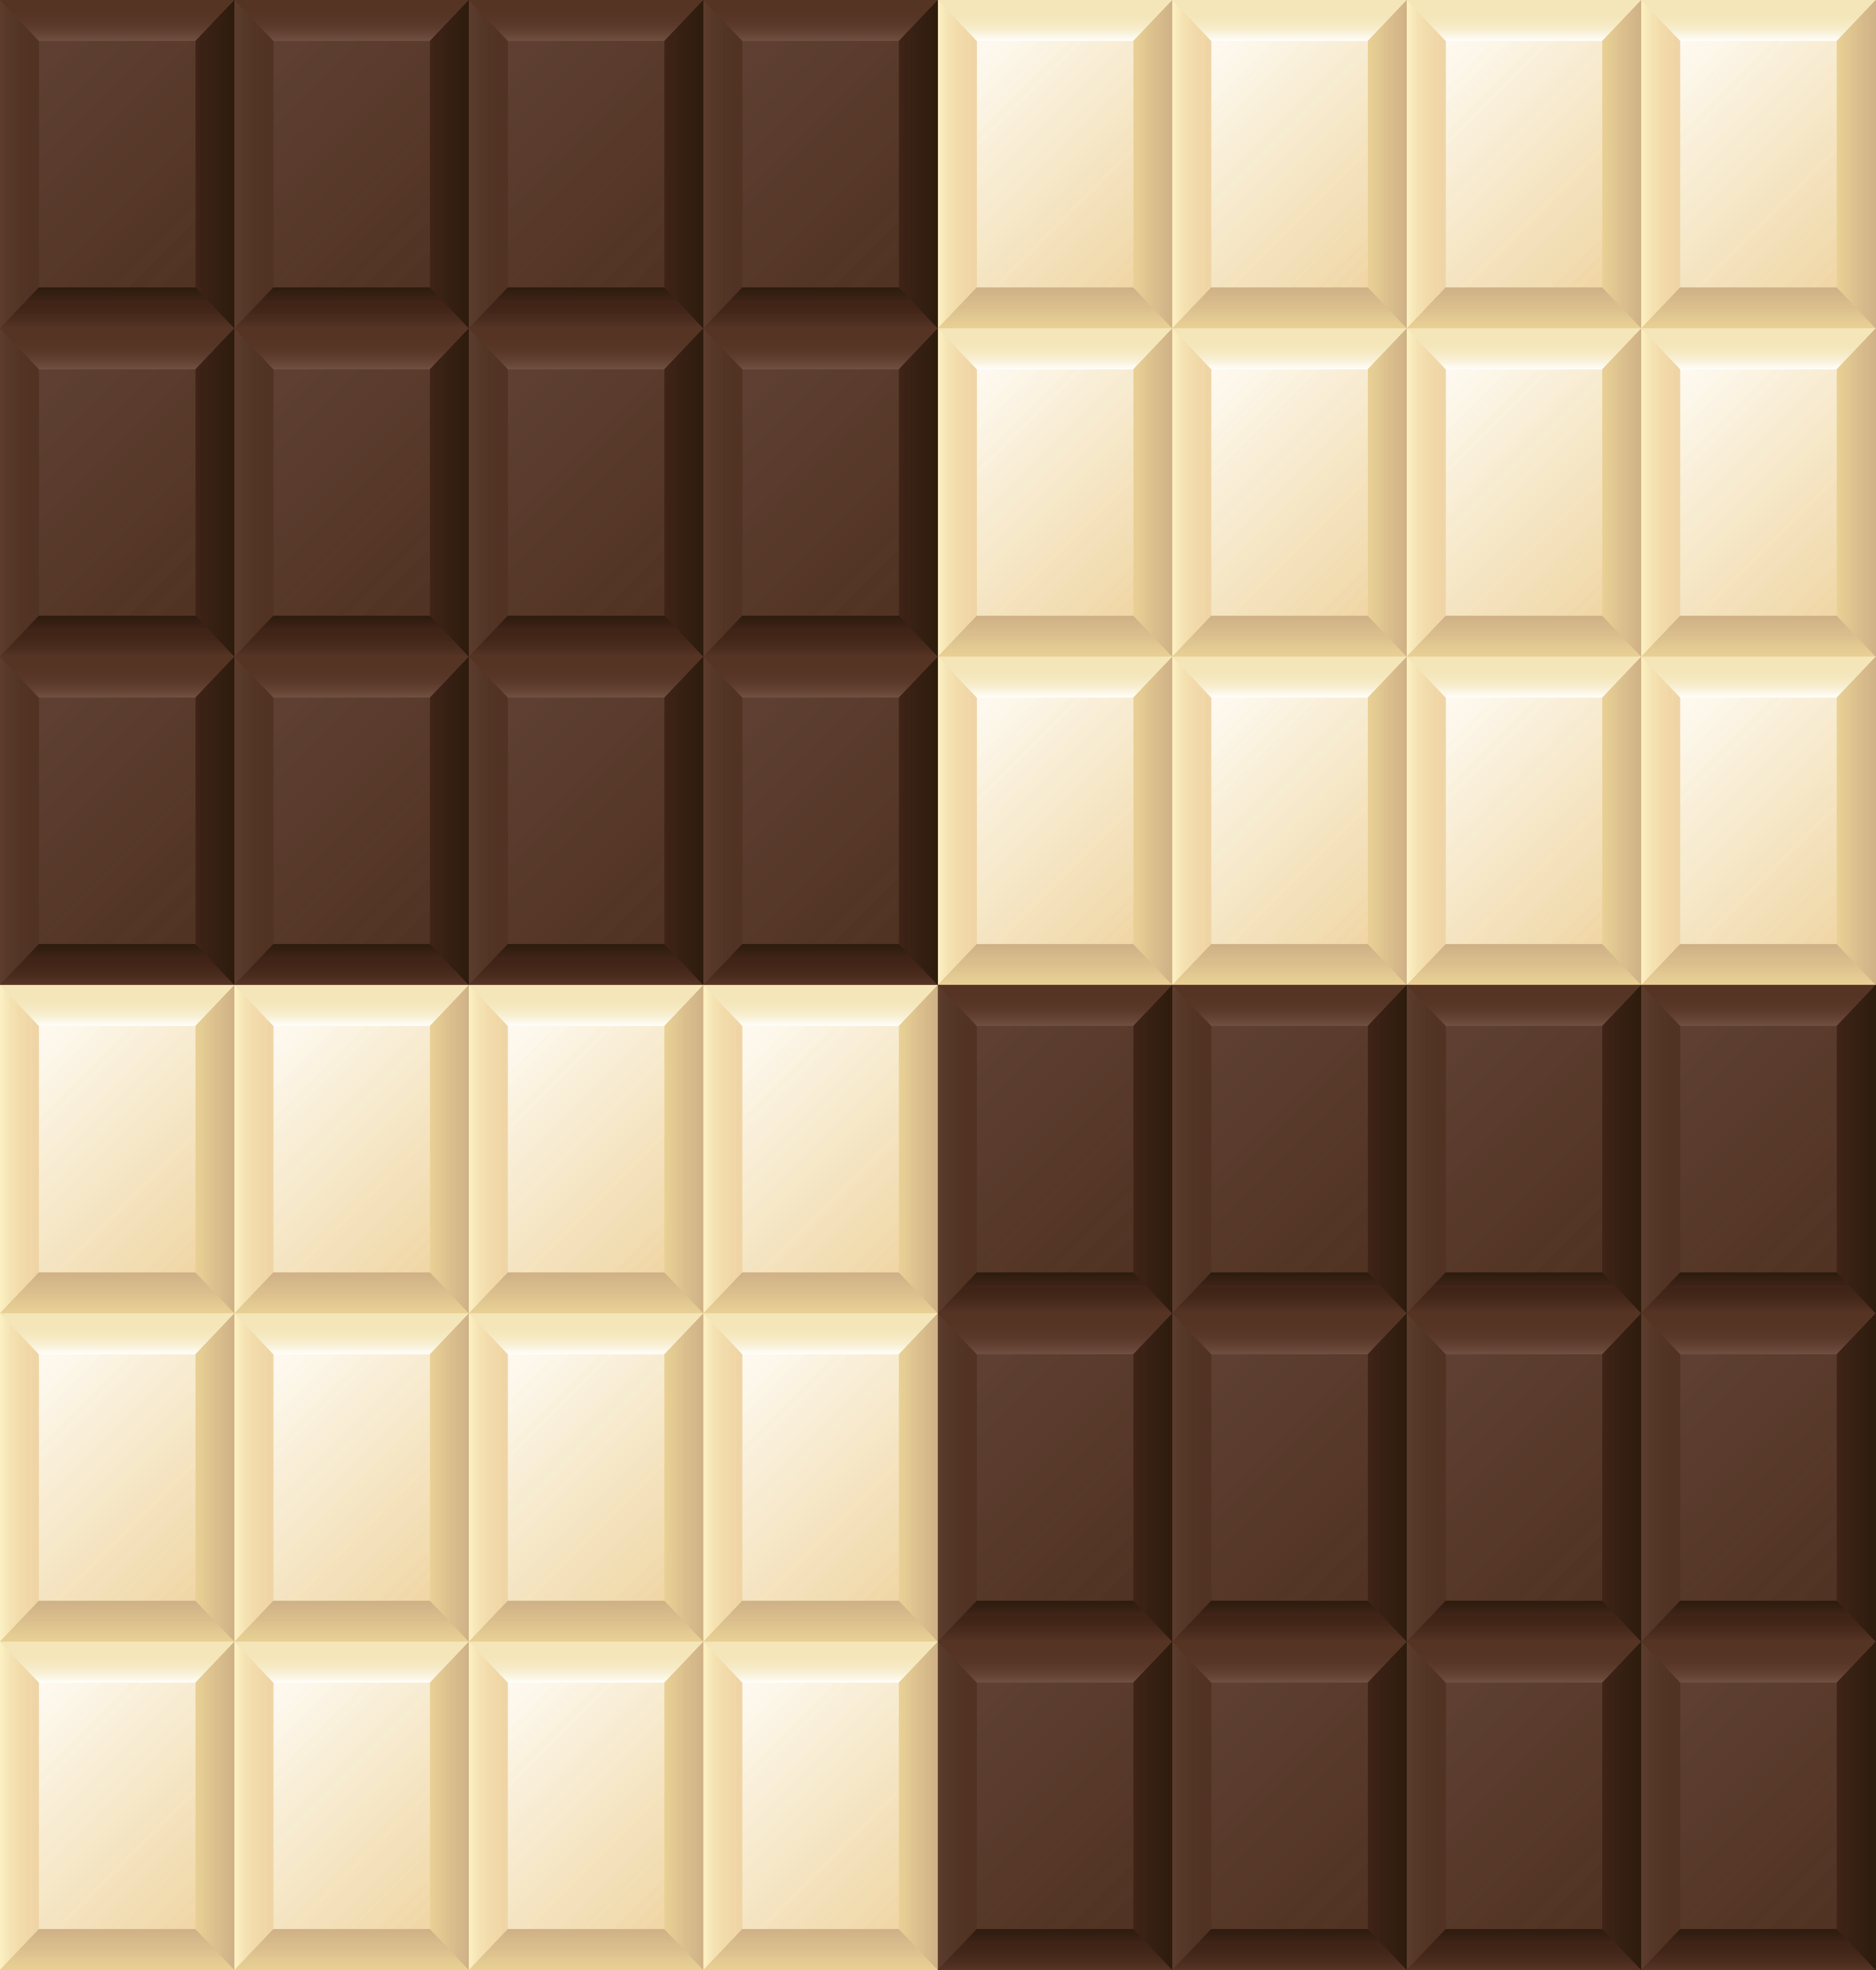 White And Dark Chocolate Bars Background Quality Image And Transparent PNG Free Clipart